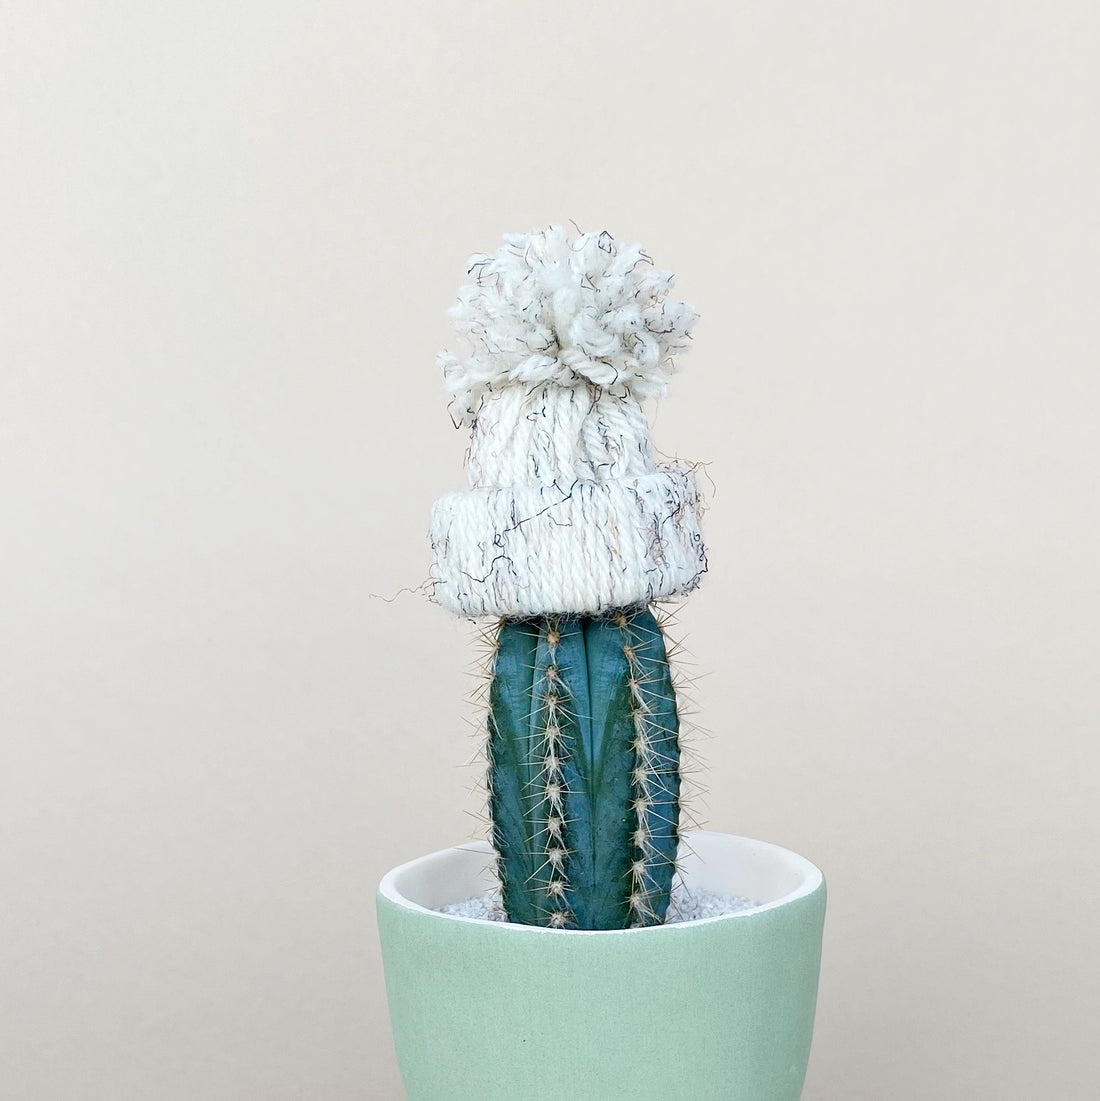 8 Easy Ways to Make Sure Your Plants are Healthy in Winter - Cute Cactus with a Hat on top